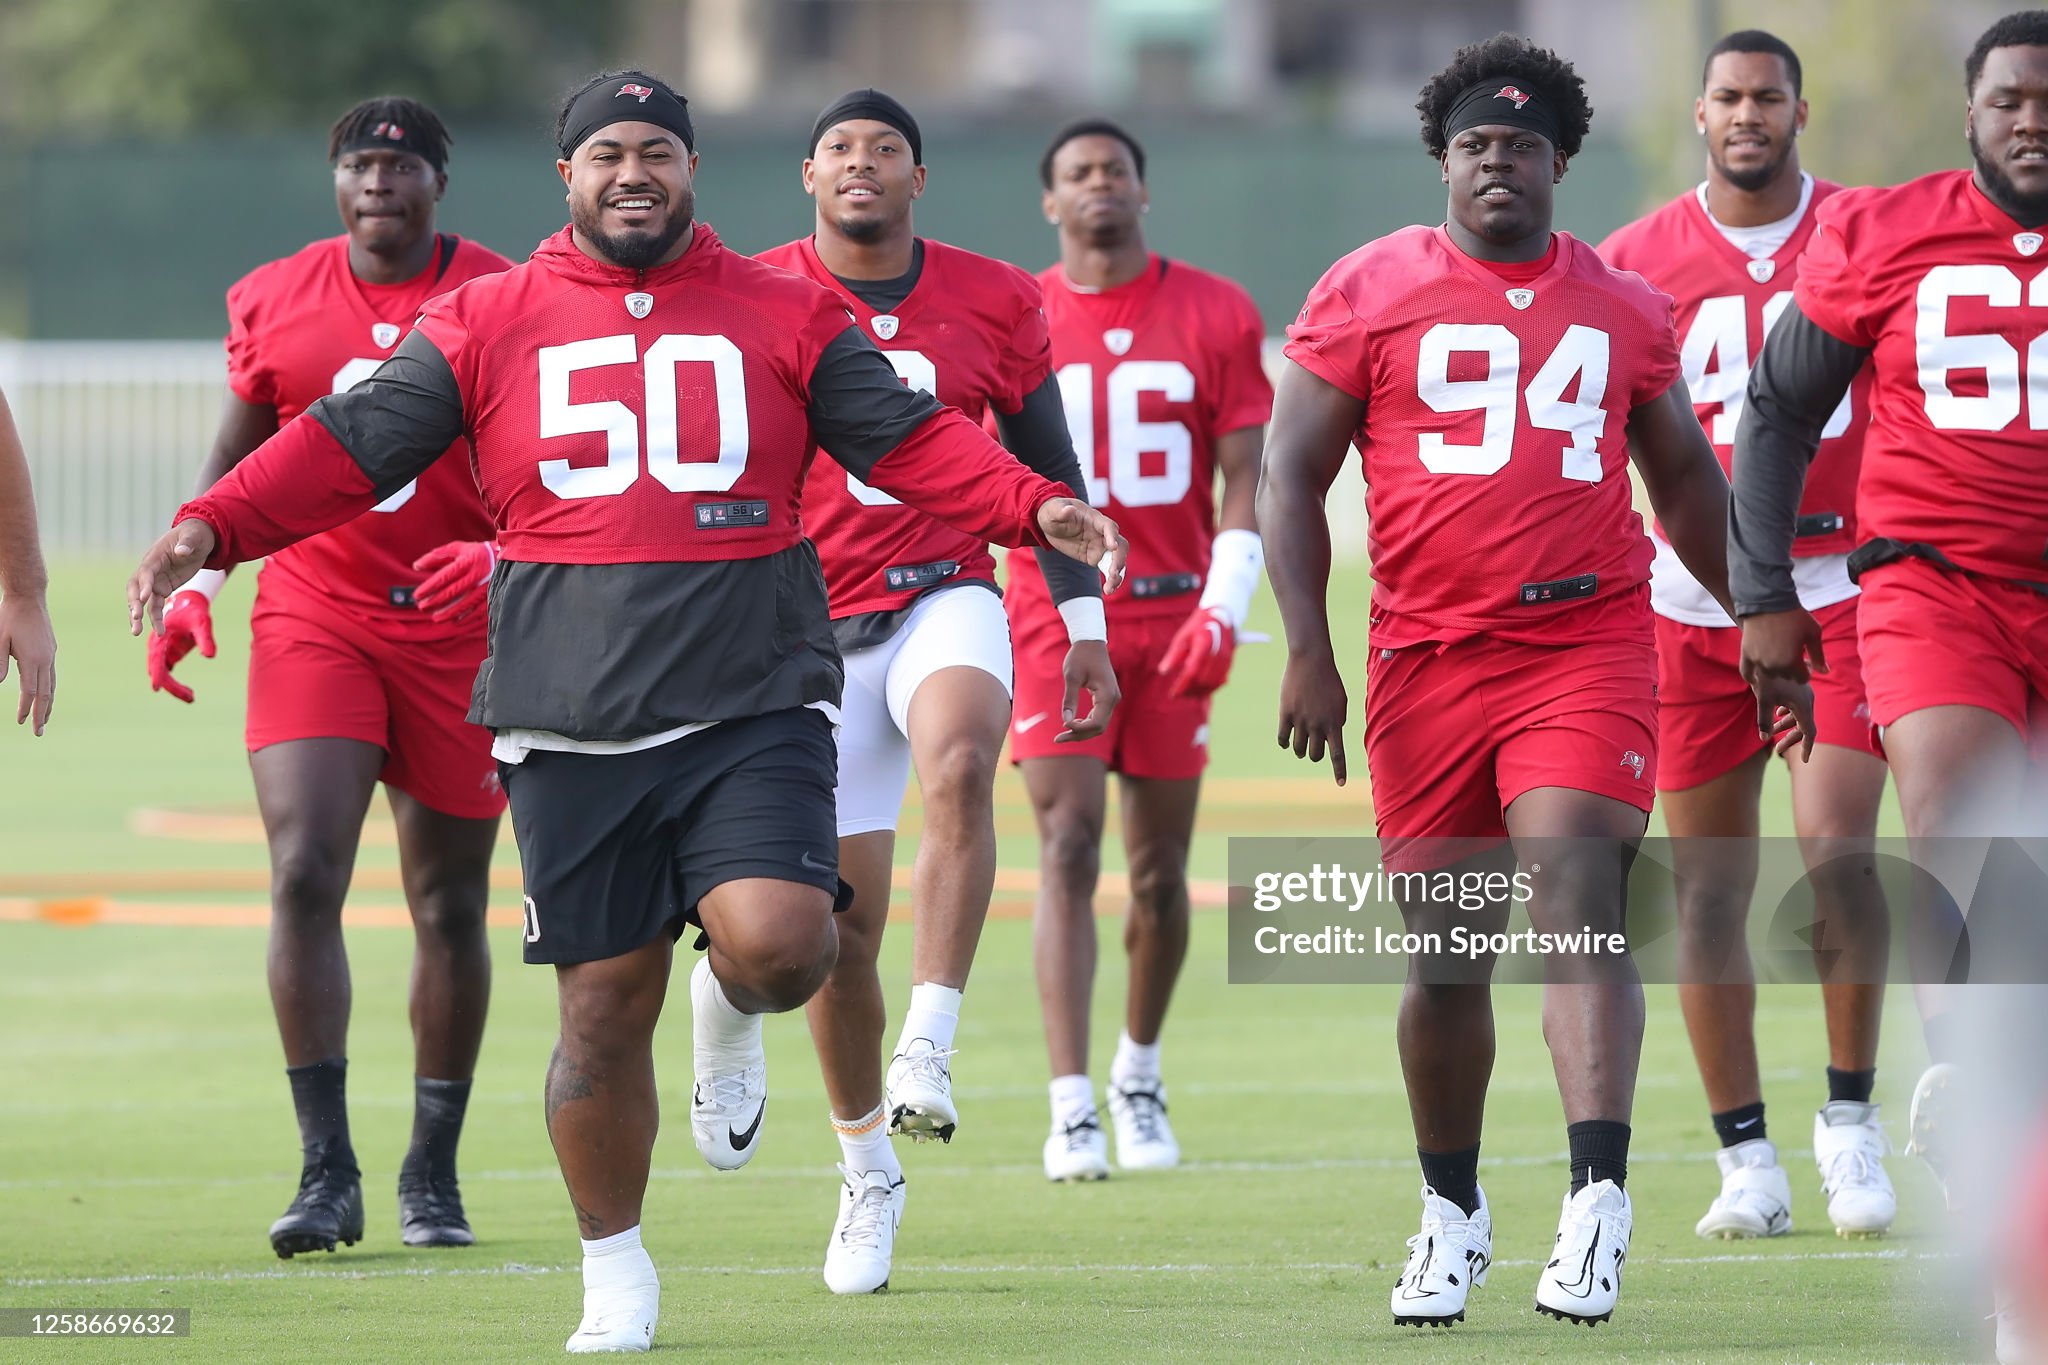 TAMPA, FL - JUN 13: Tampa Bay Buccaneers Defensive Lineman Vita Vea (50) and Calijah Kancey (94) warm up during the Tampa Bay Buccaneers Minicamp on June 13, 2023 at the AdventHealth Training Center at One Buccaneer Place in Tampa, Florida. (Photo by Cliff Welch/Icon Sportswire via Getty Images)